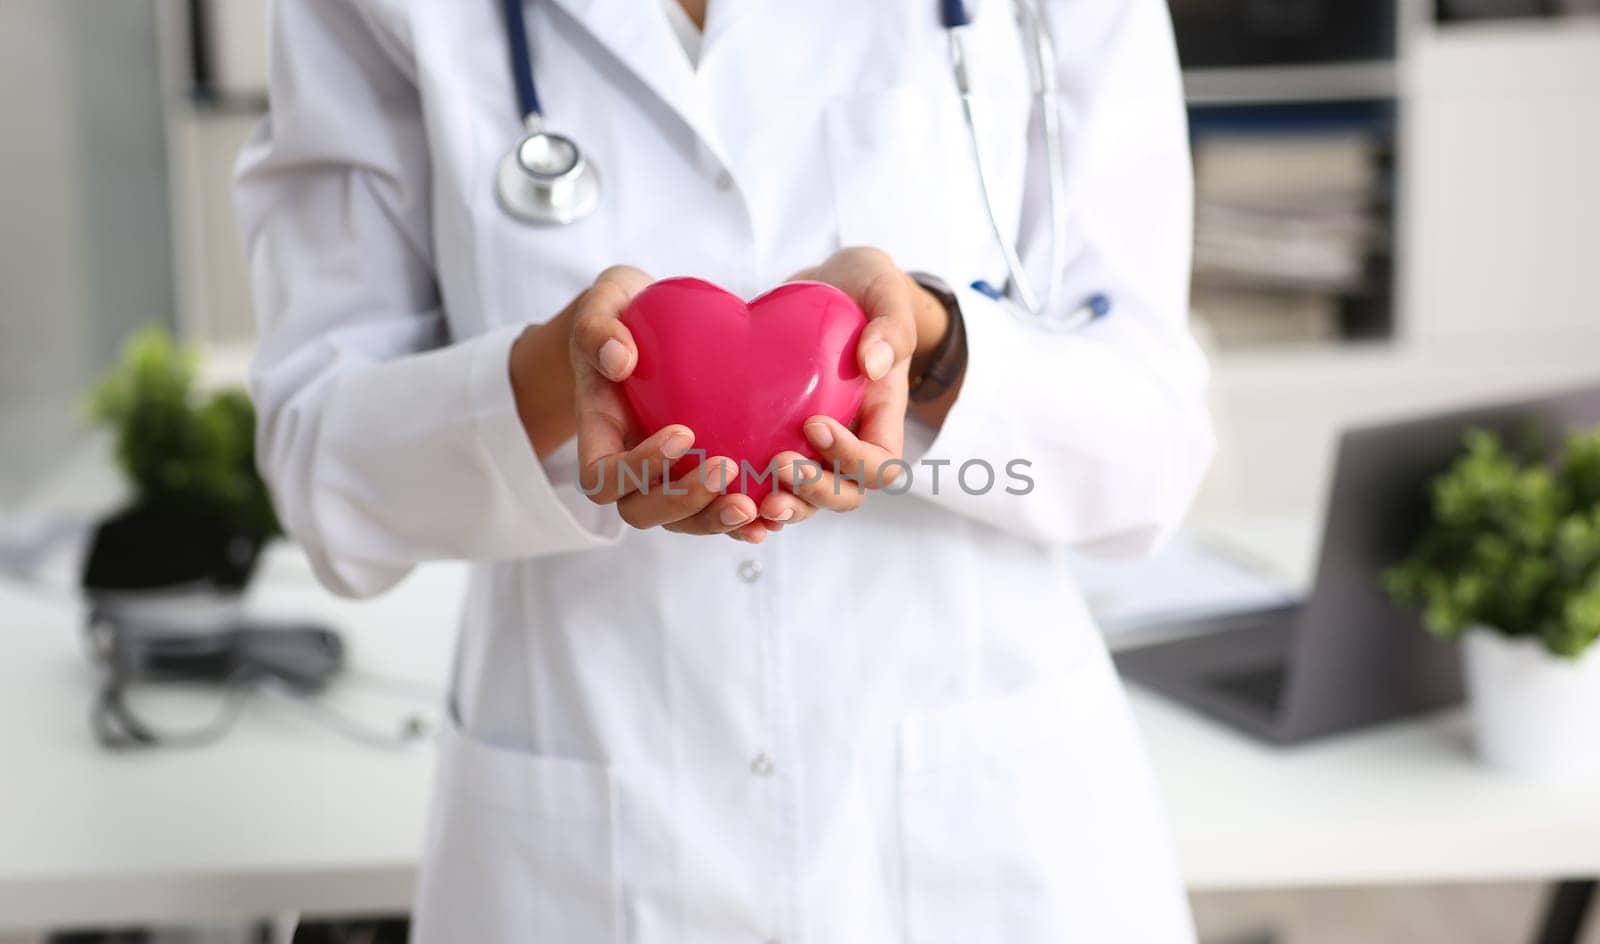 Female doctor hold in arms and cover red toy heart closeup. Cardio therapeutist student education CPR 911 life save physician make cardiac physical pulse rate measure arrhythmia lifestyle